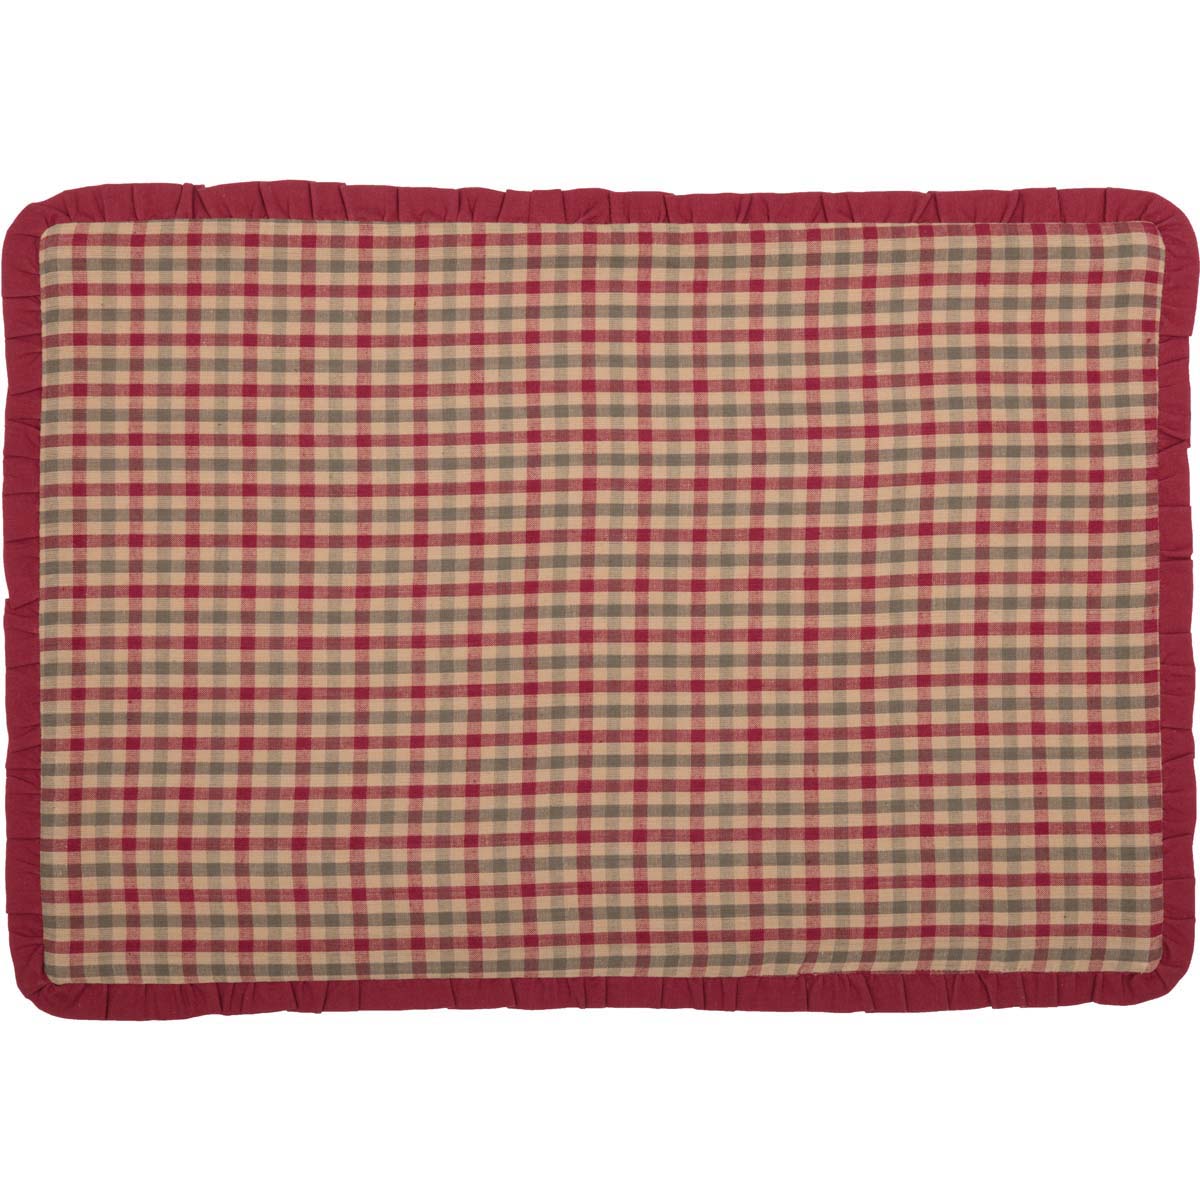 Jonathan Plaid Ruffled Placemat Set of 6 12x18 VHC Brands